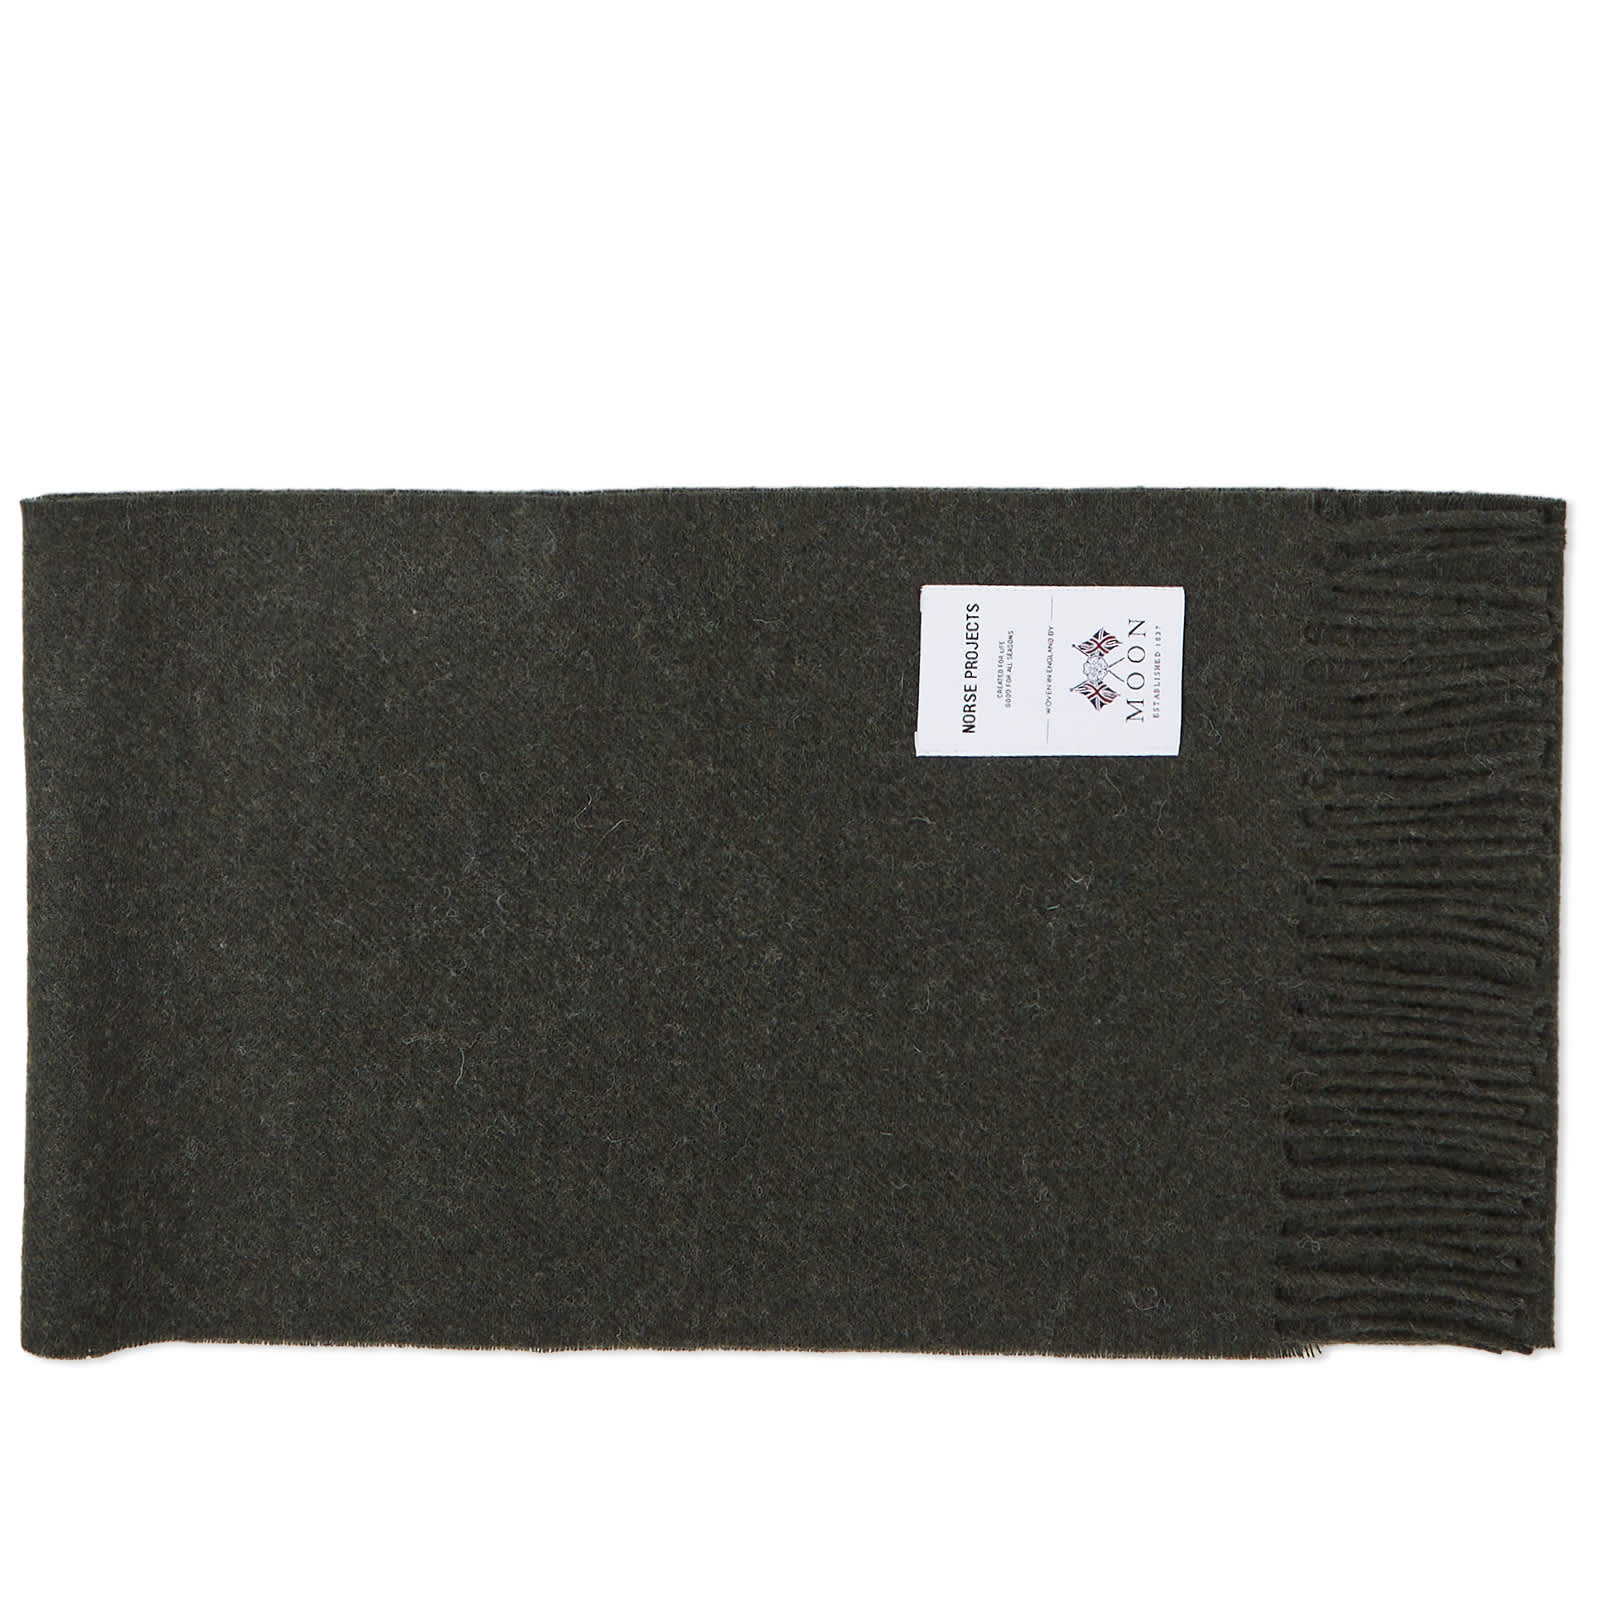 Шарф Norse Projects Moon Lambswool, цвет Beech Green джемпер norse projects sigfred lambswool knit серый